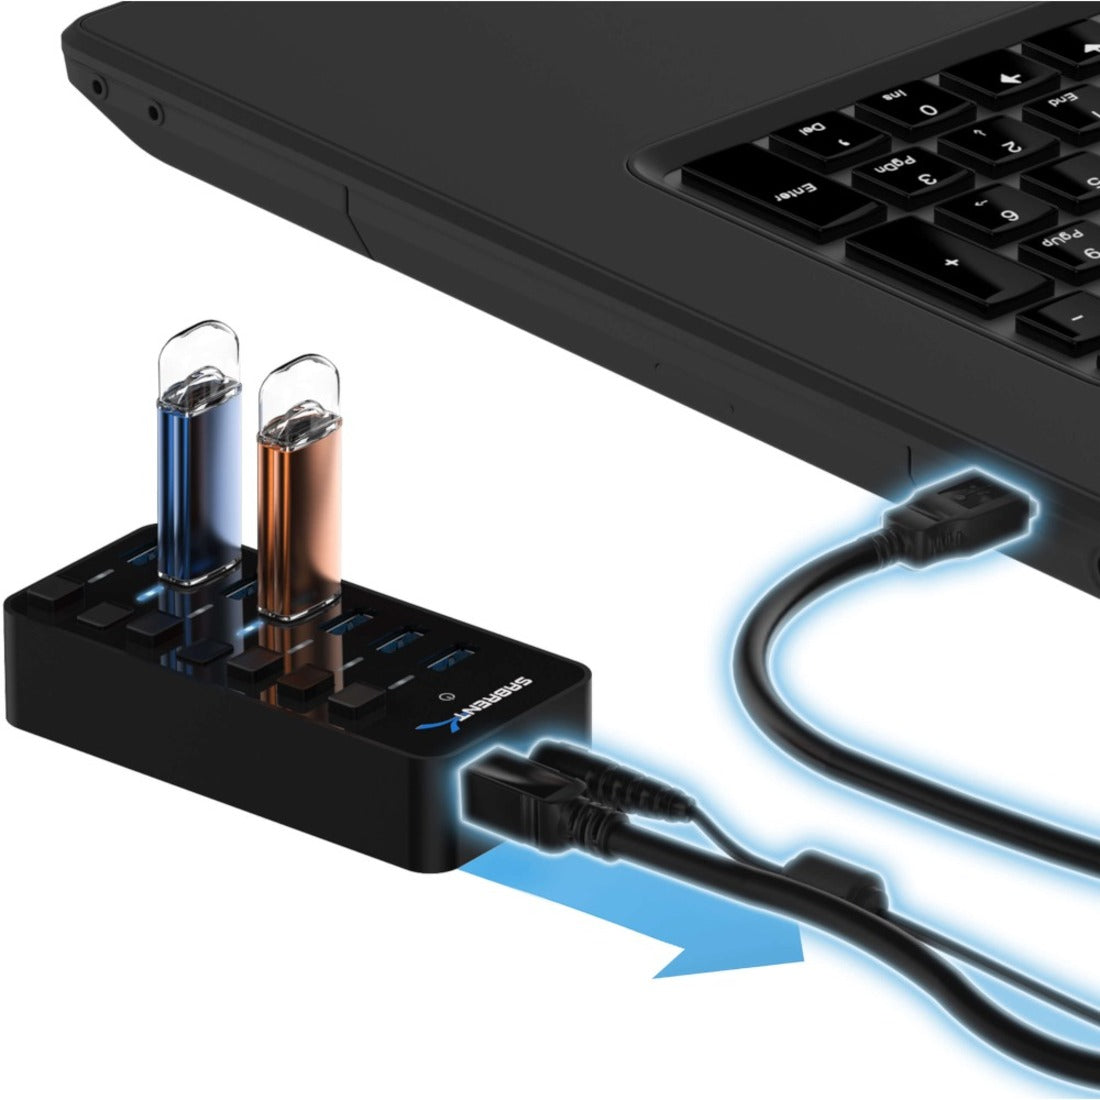 Sabrent HB-BUP7 36W 7-Port USB 3.0 Hub with Individual Power Switches and LEDs, Expand Your USB Connectivity